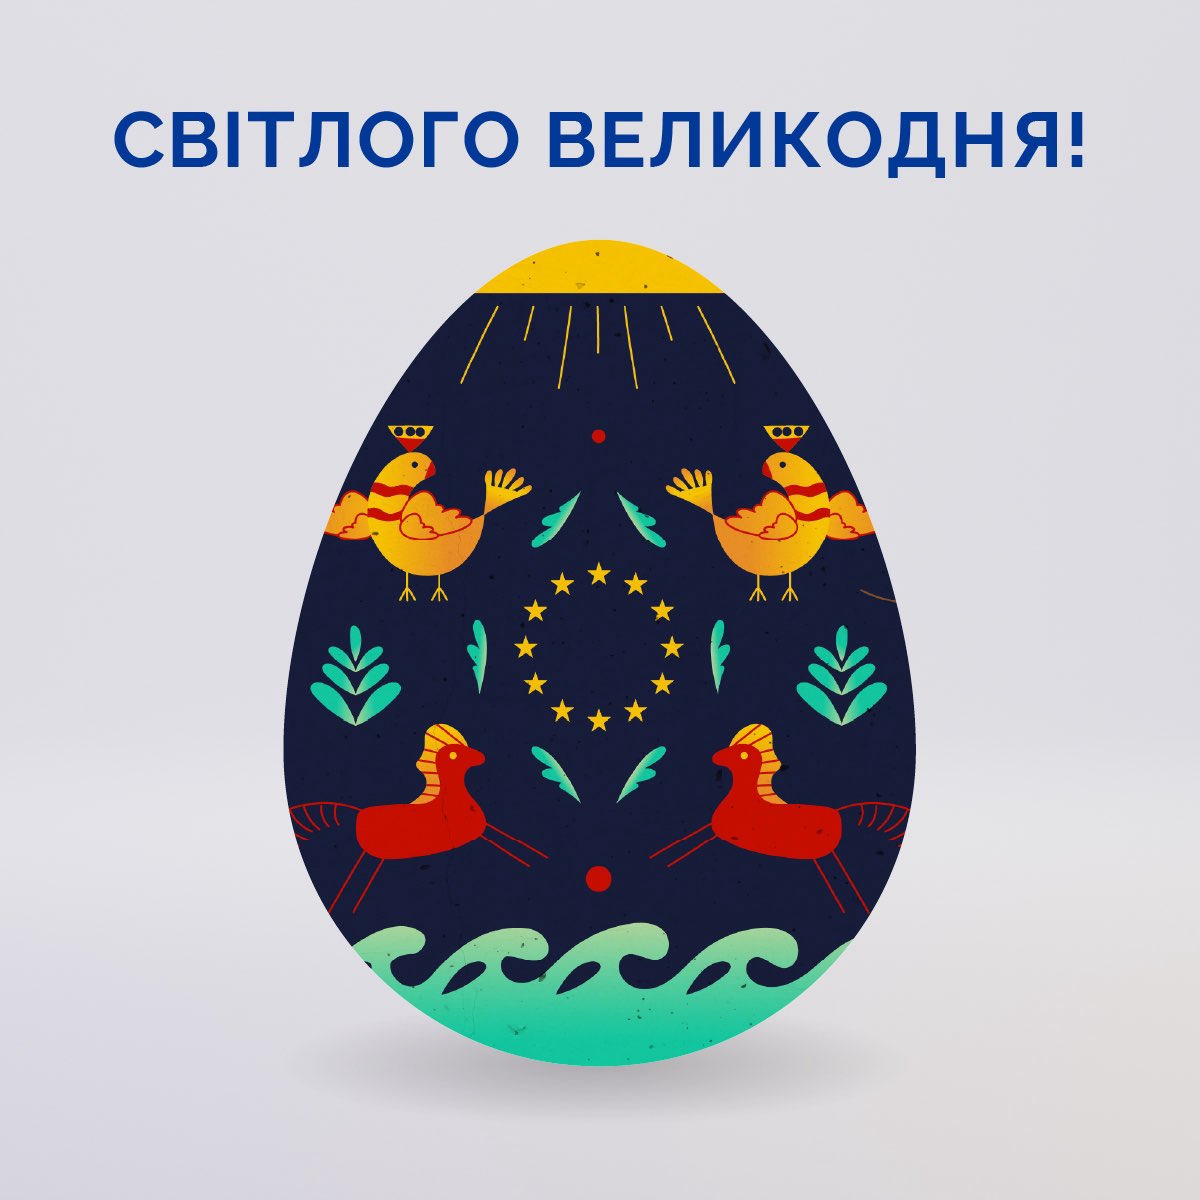 Wishing calm Easter to all Ukrainian friends. May it bring moments of joy & renewal and unite us in hope and resilience. Христос воскрес!